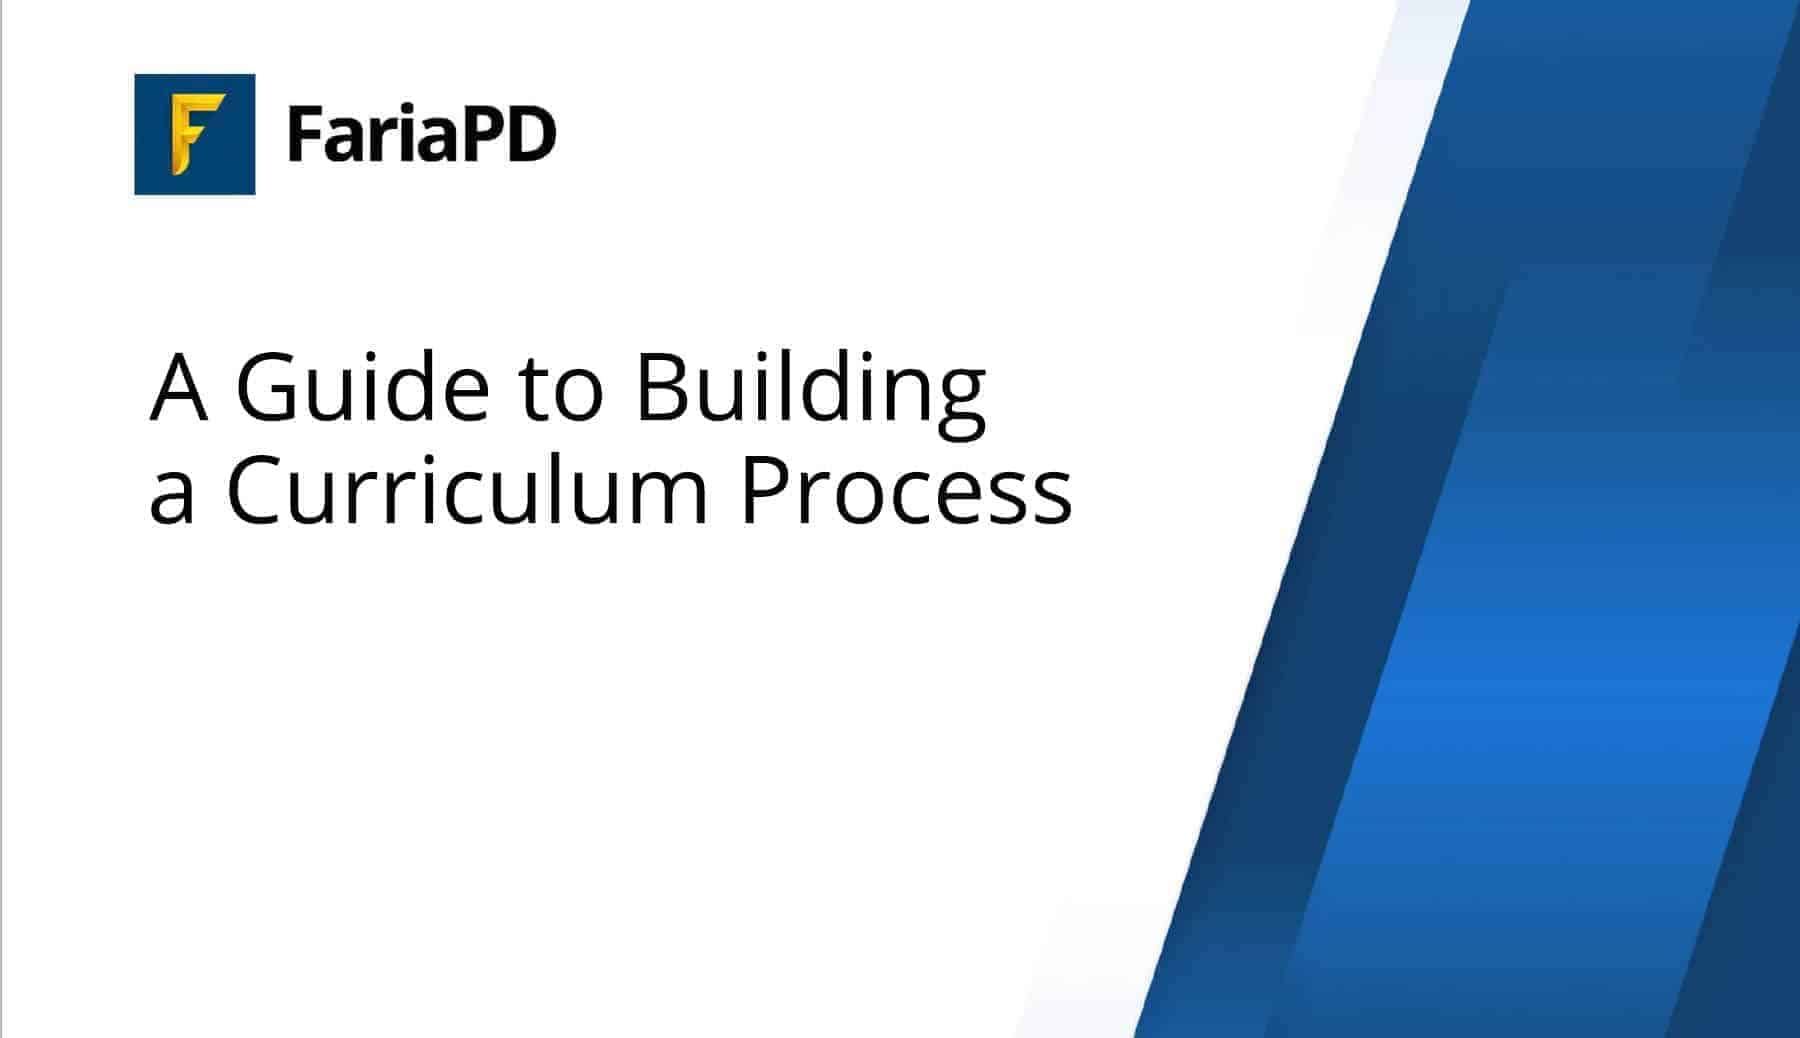 A Guide to Building a Curriculum Process